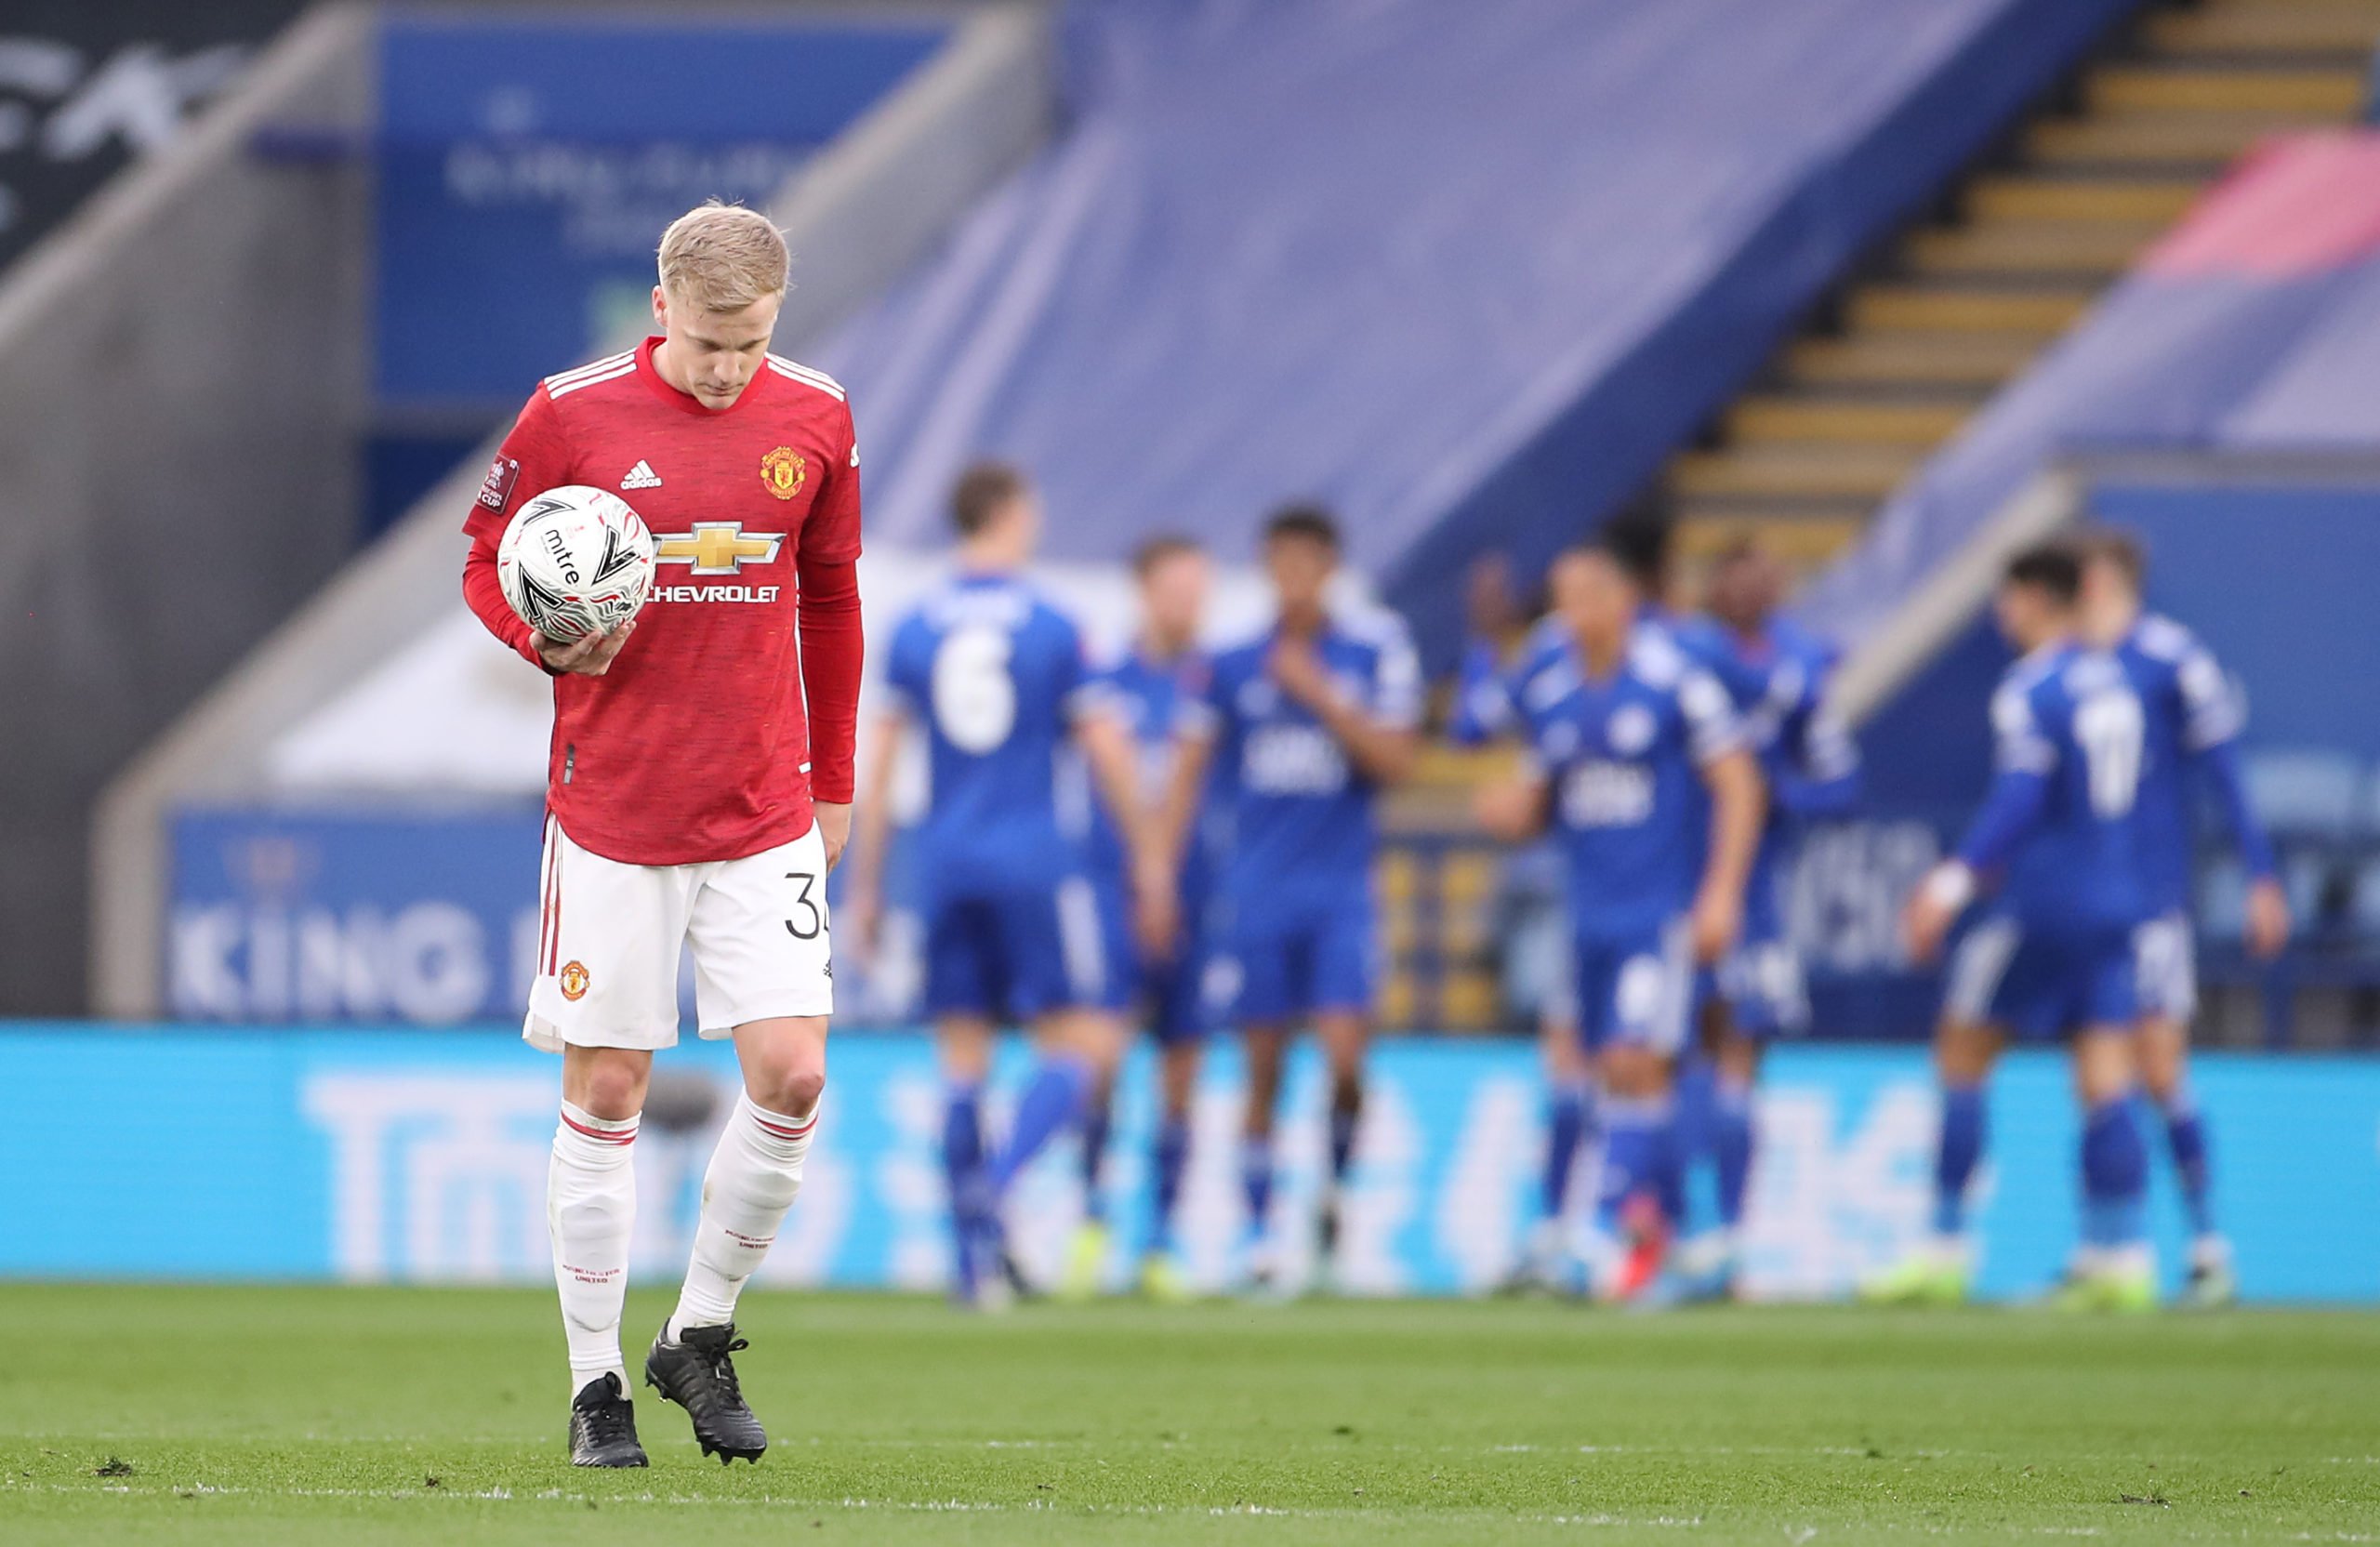 LEICESTER, ENGLAND - MARCH 21: Donny van de Beek of Manchester United looks dejected after conceding his side's first goal during the Emirates FA Cup Quarter Final  match between Leicester City and Manchester United at The King Power Stadium on March 21, 2021 in Leicester, England. Sporting stadiums around the UK remain under strict restrictions due to the Coronavirus Pandemic as Government social distancing laws prohibit fans inside venues resulting in games being played behind closed doors.  (Photo by Alex Pantling/Getty Images)The 4th Official uses images provided by the following image agency: Getty Images (https://www.gettyimages.de/) and Imago Images (https://www.imago-images.de/)